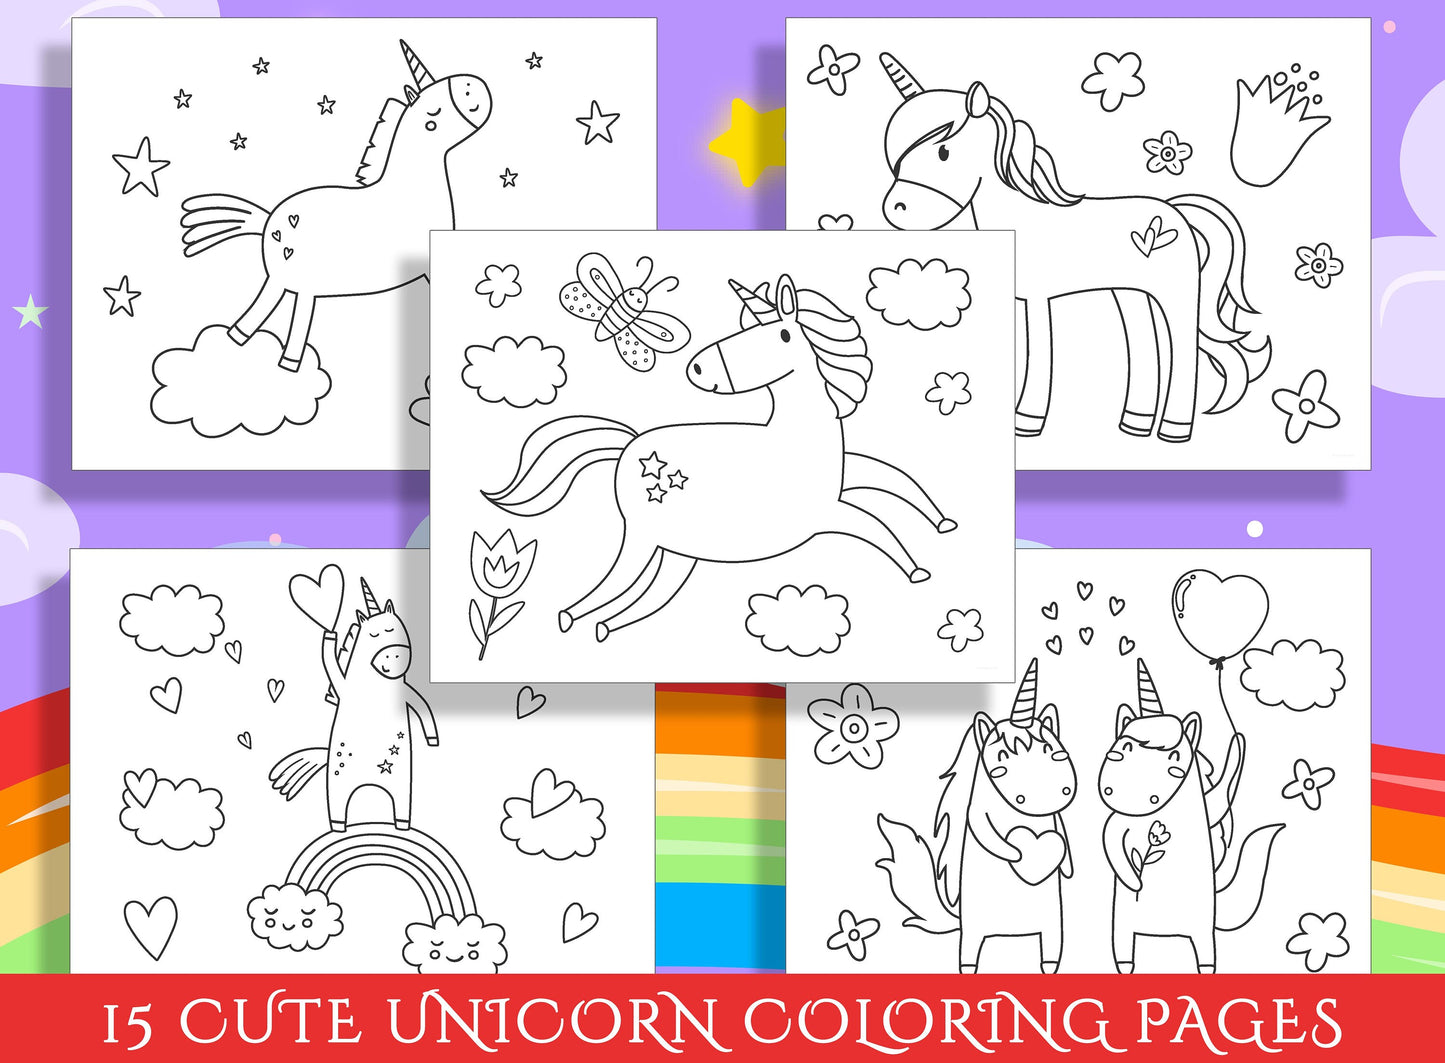 Cute Unicorn Coloring Pages for Preschool and Kindergarten: 15 Adorable Designs to Spark Imagination, PDF File, Instant Download